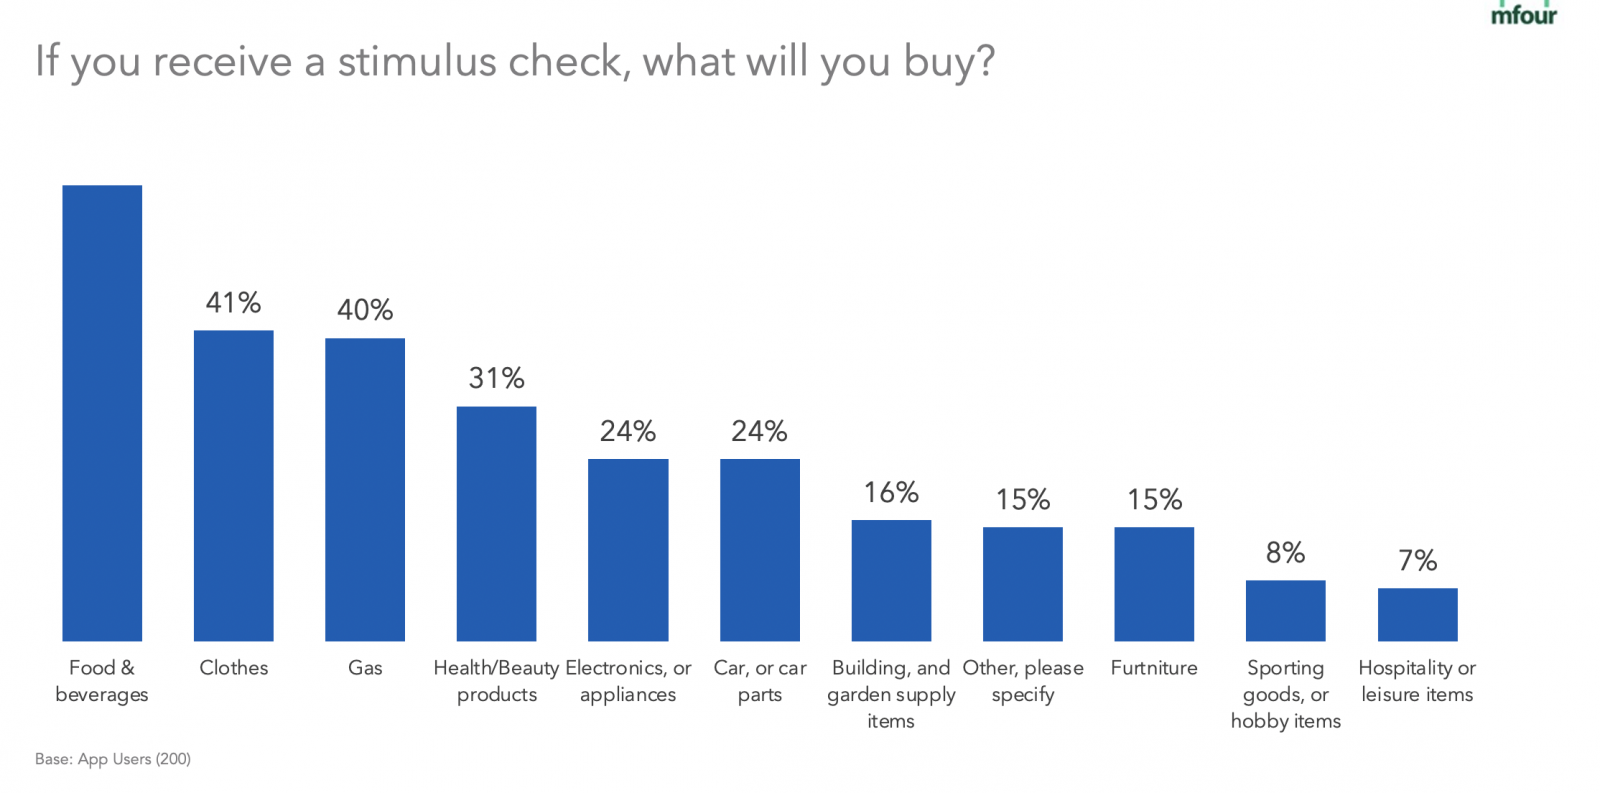 If you receive a stimulus check, what will you buy?